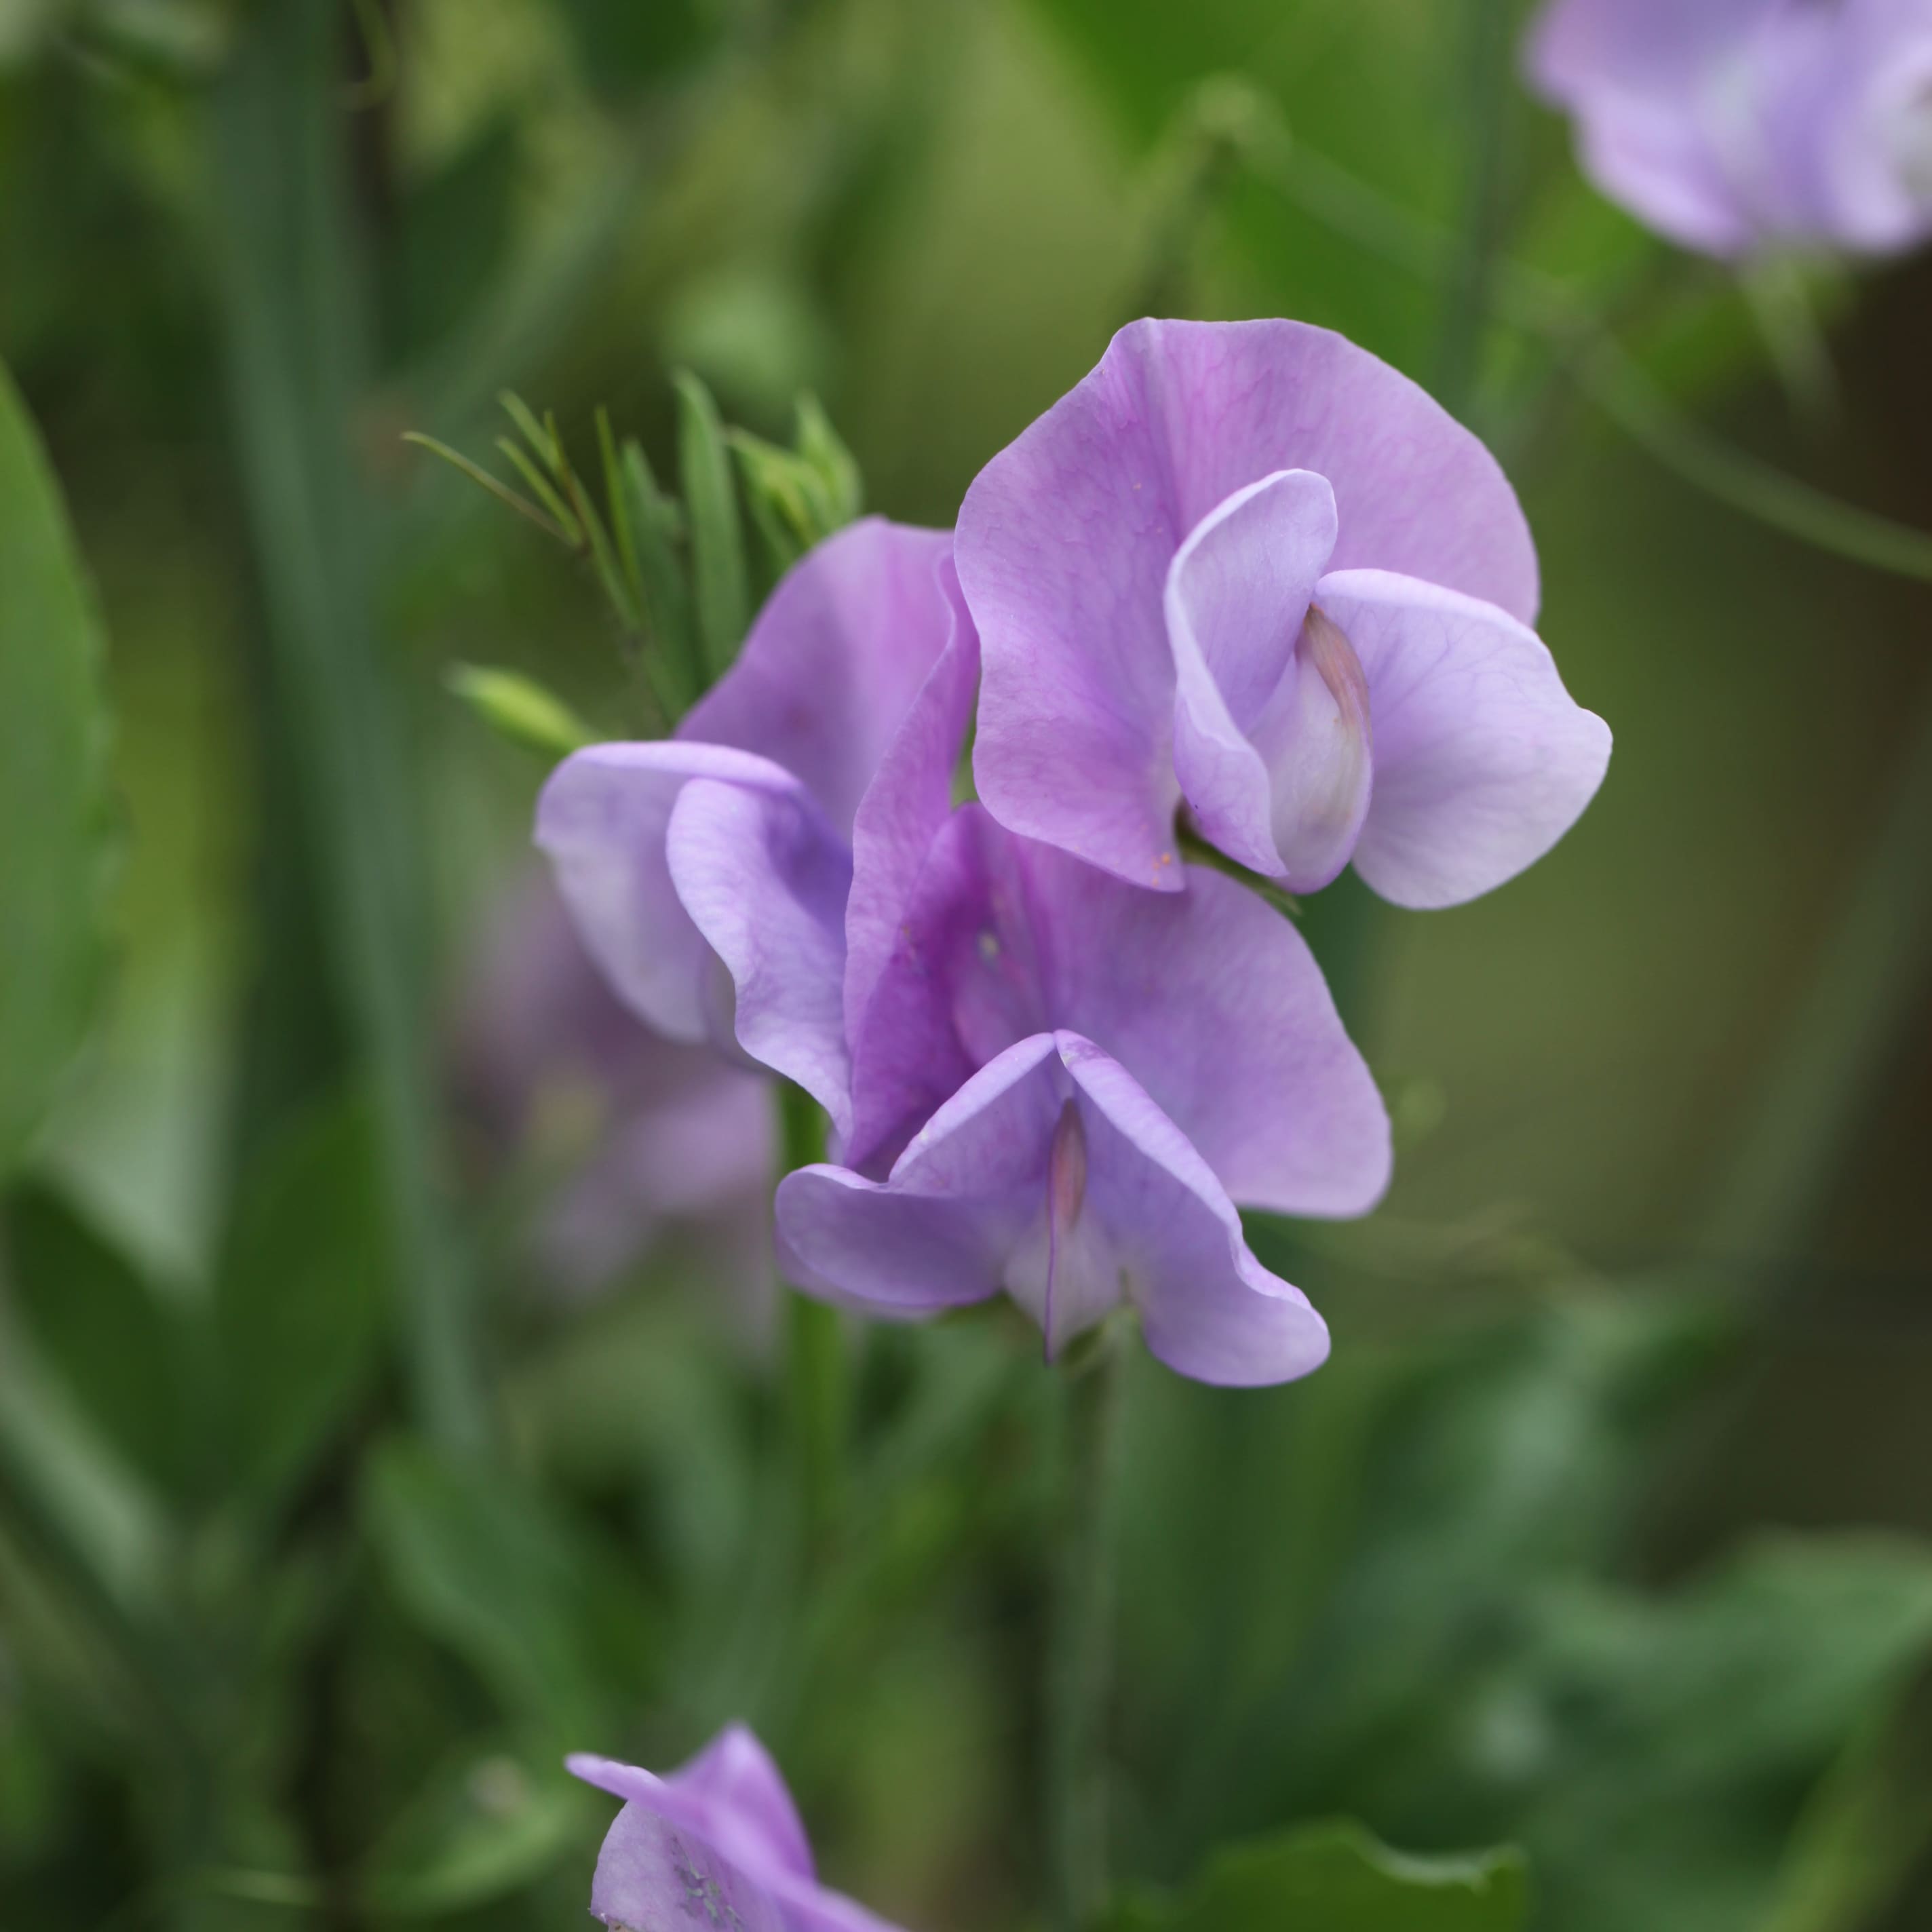 Potted sweet peas